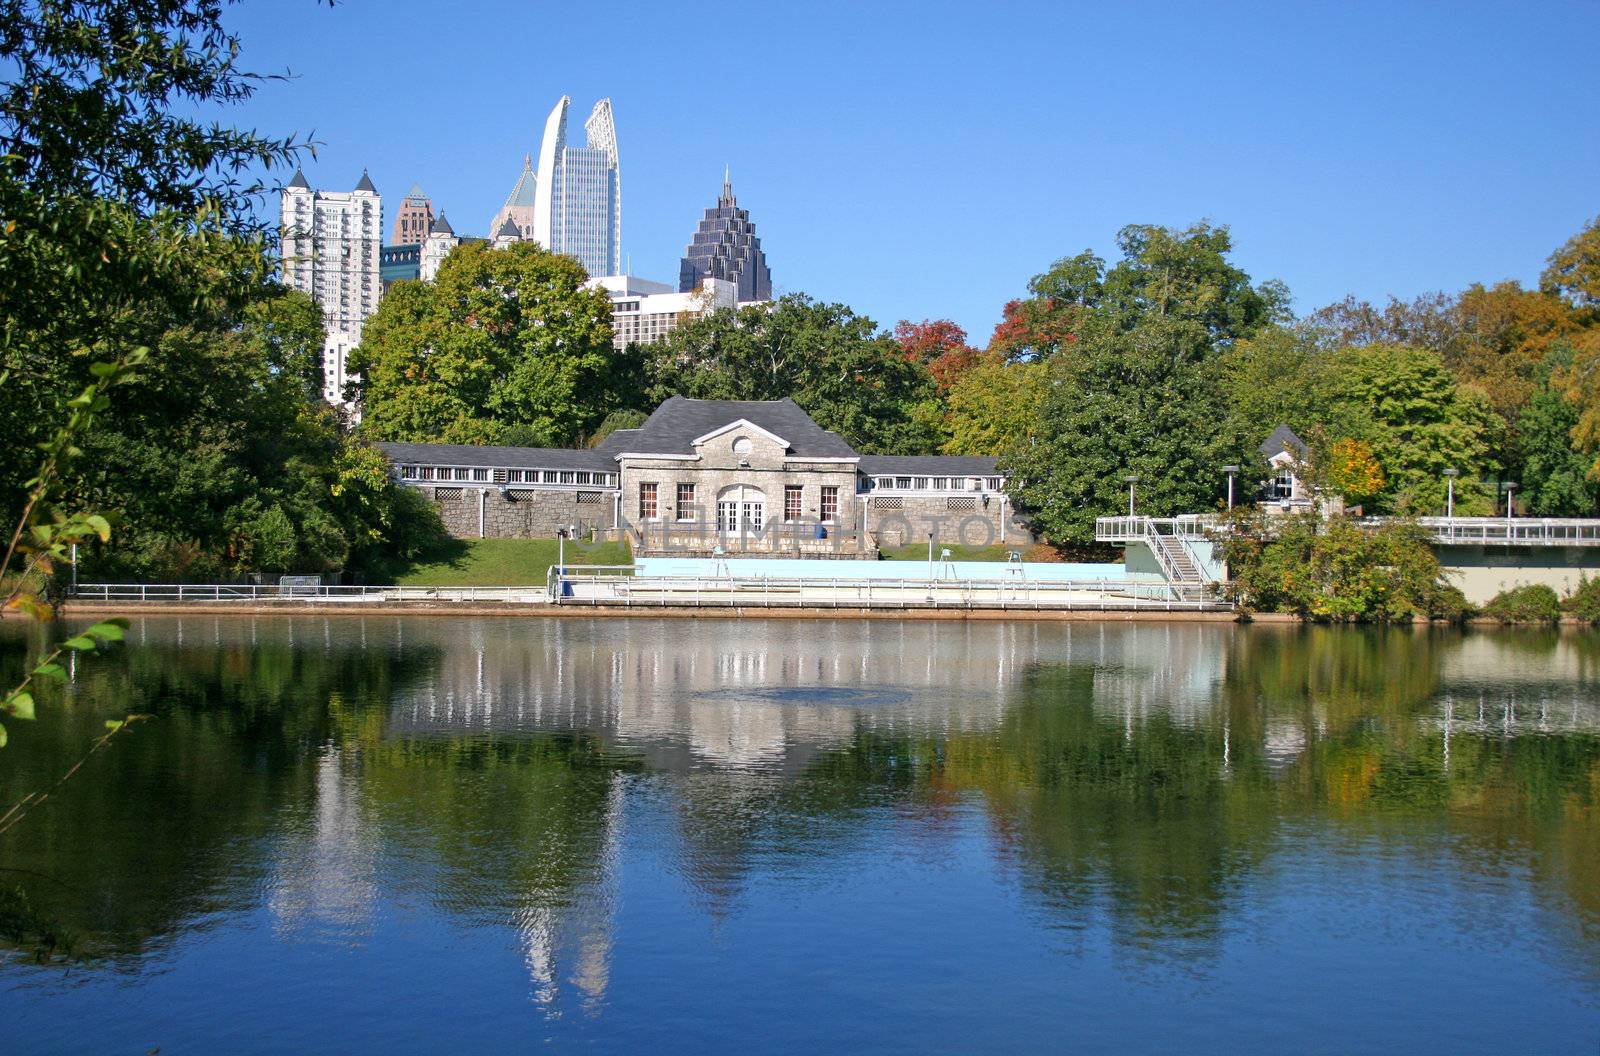 Poolhouse and city skyline across lake in park